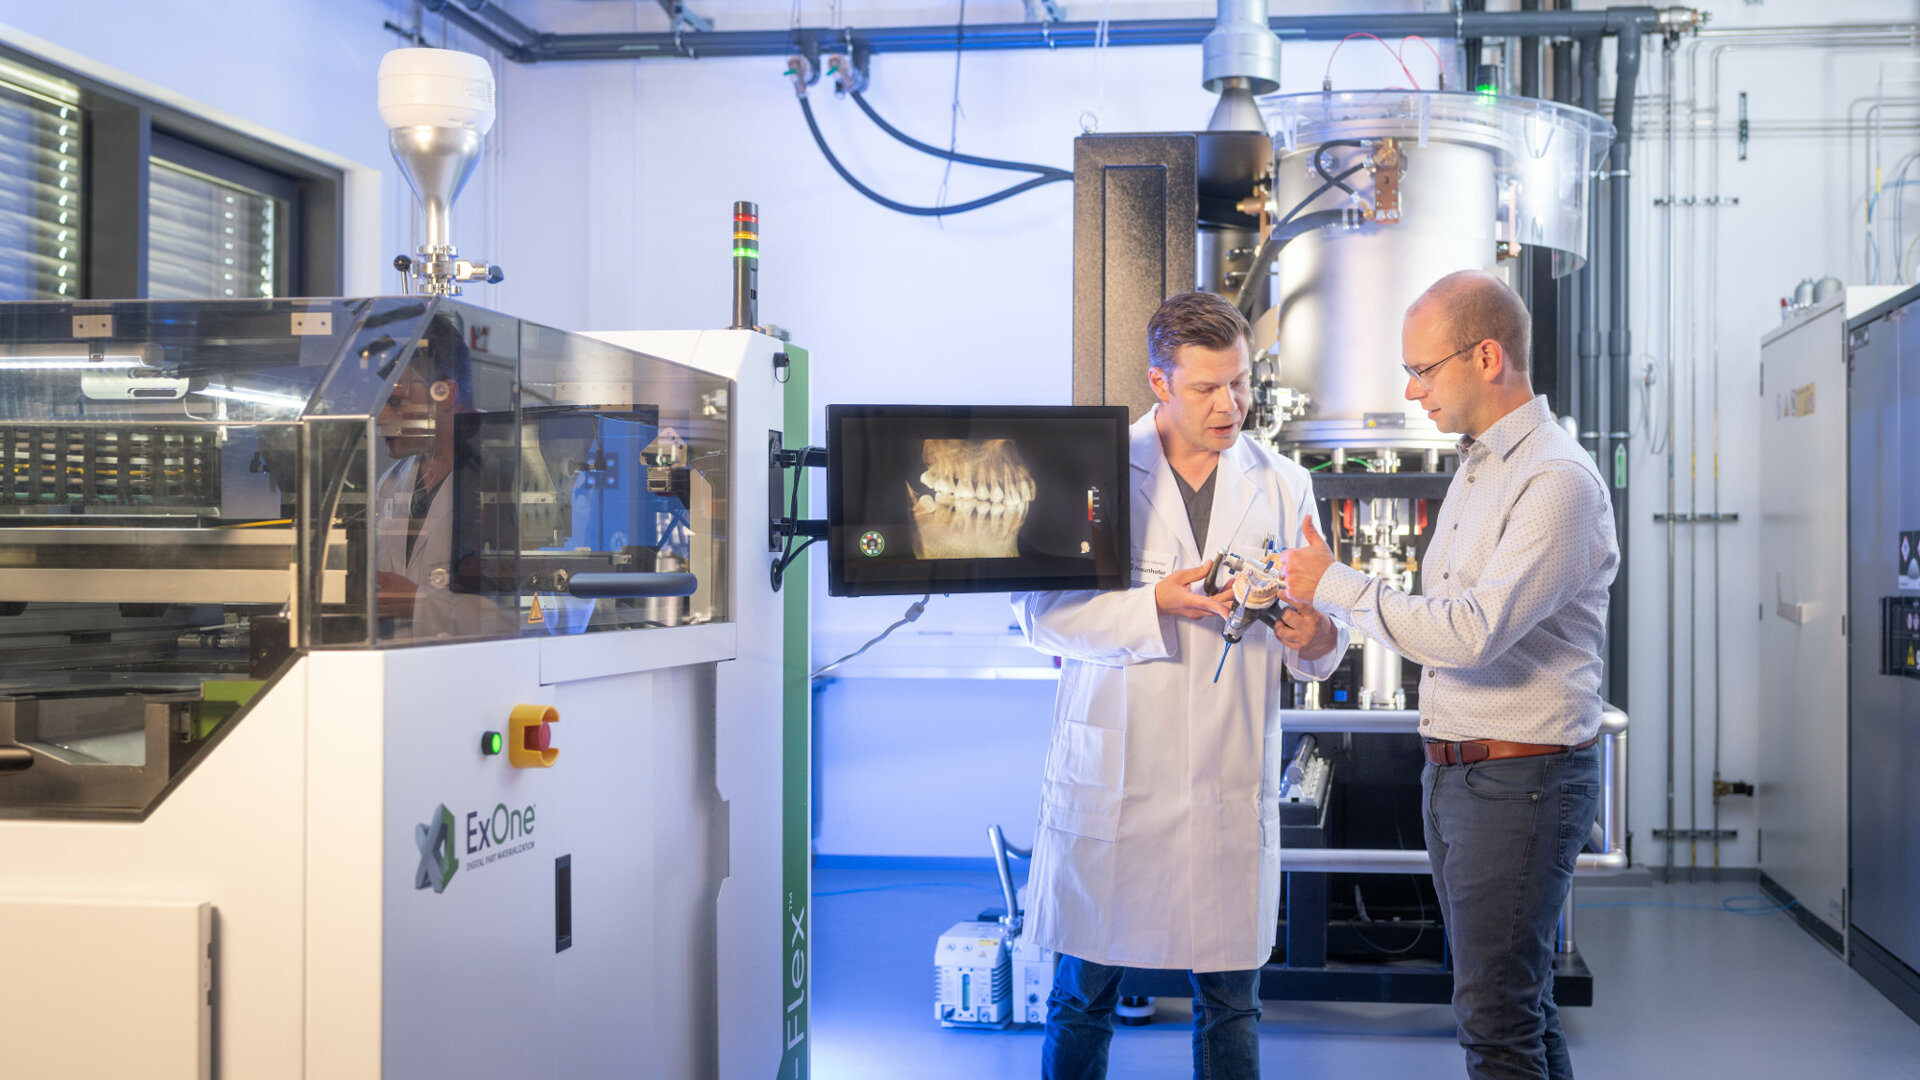 3D printing in dentistry: Fraunhofer bringing future technologies into the present